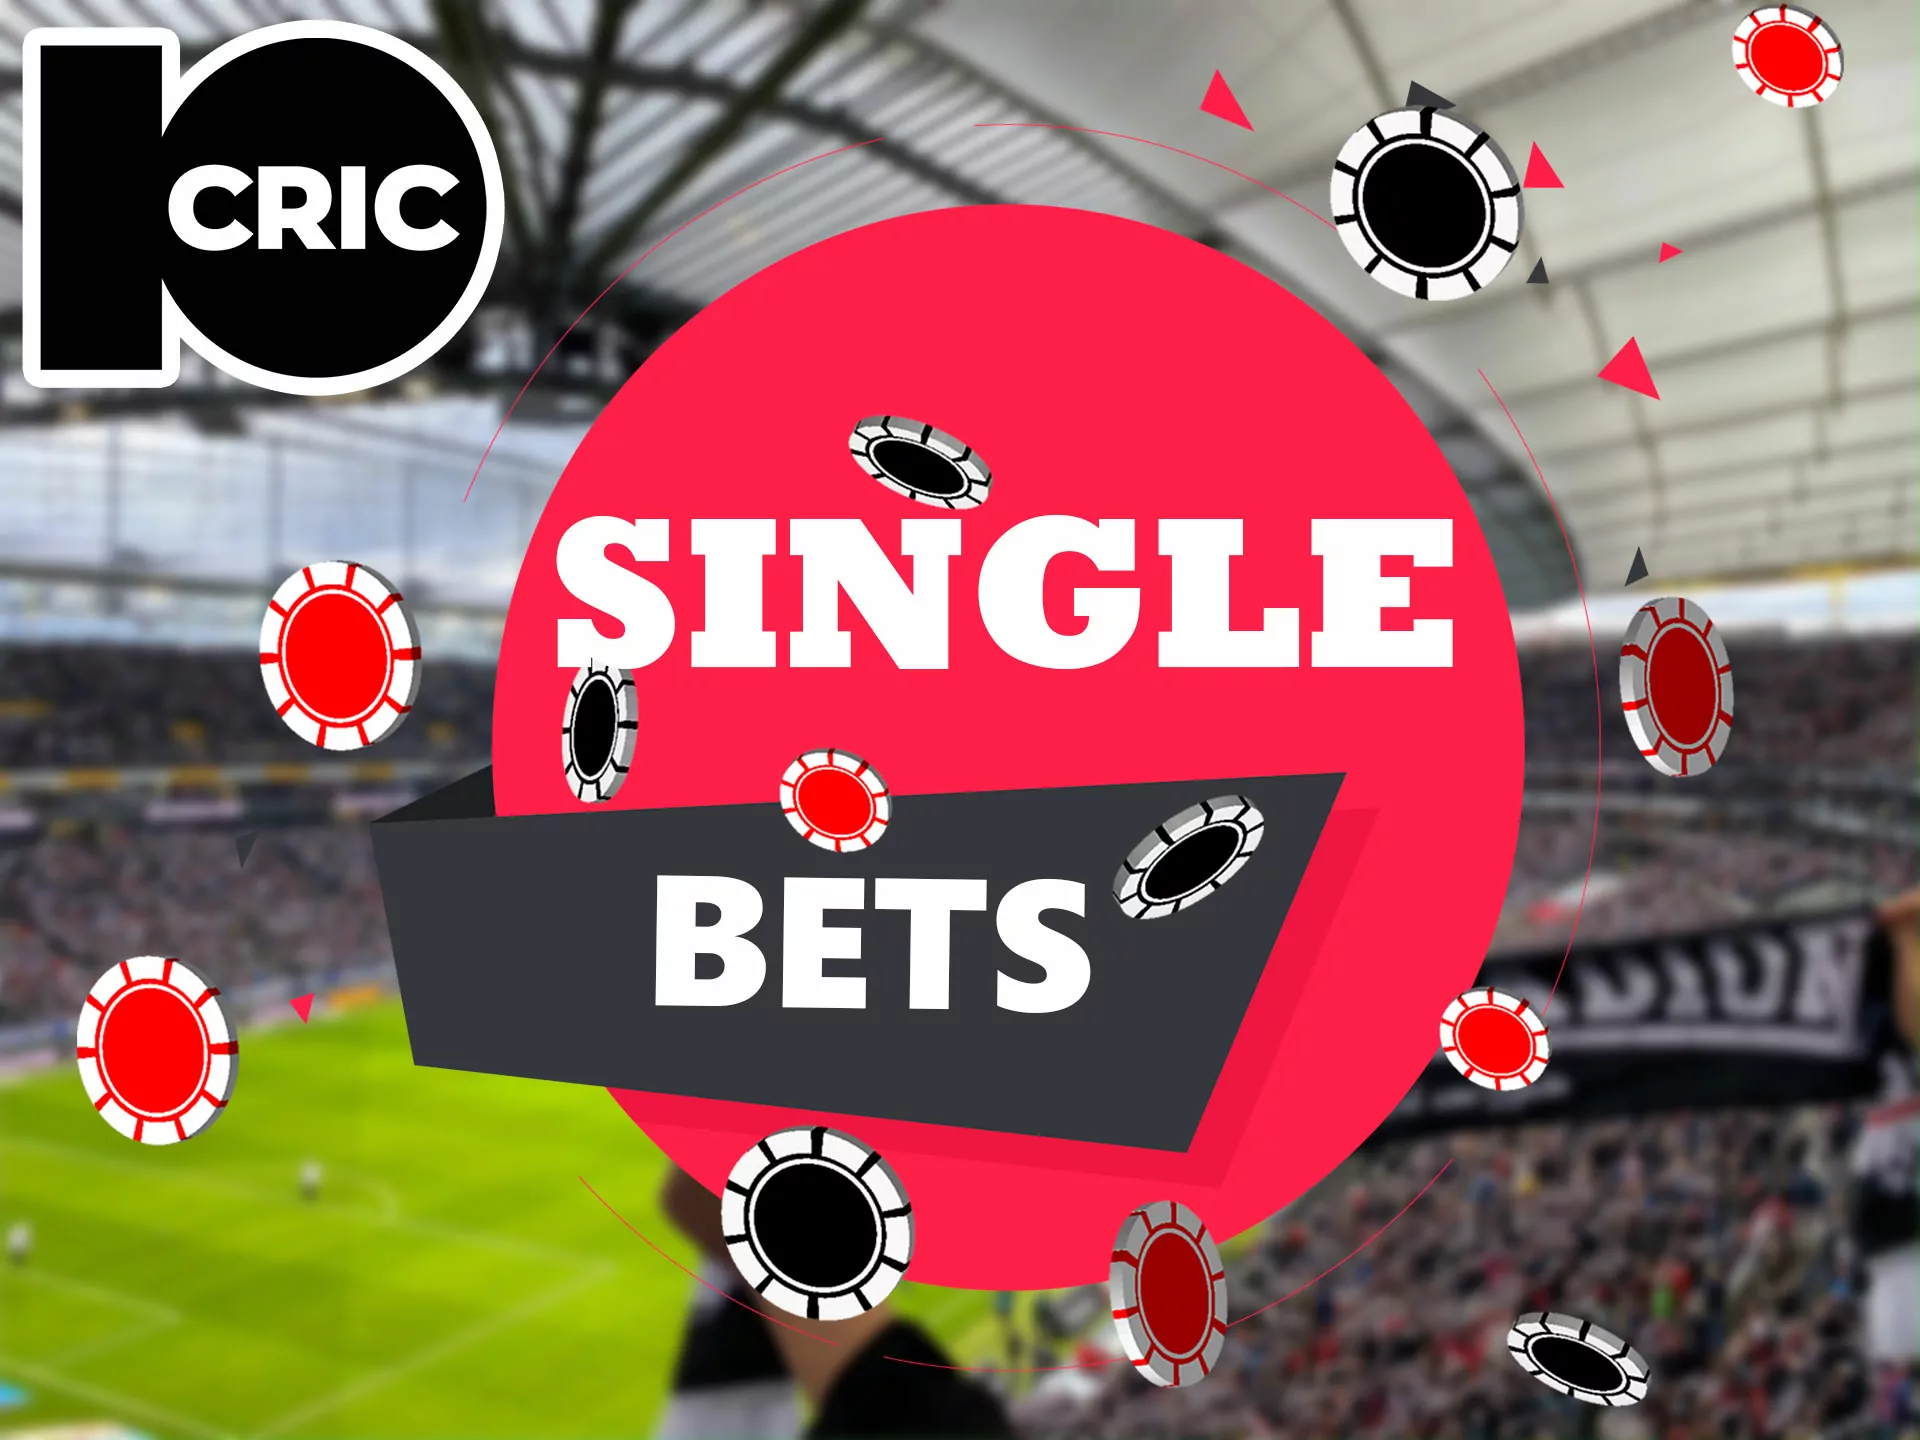 A simple type of cash investment, it assumes that the player bets on one of the outcomes of the match.